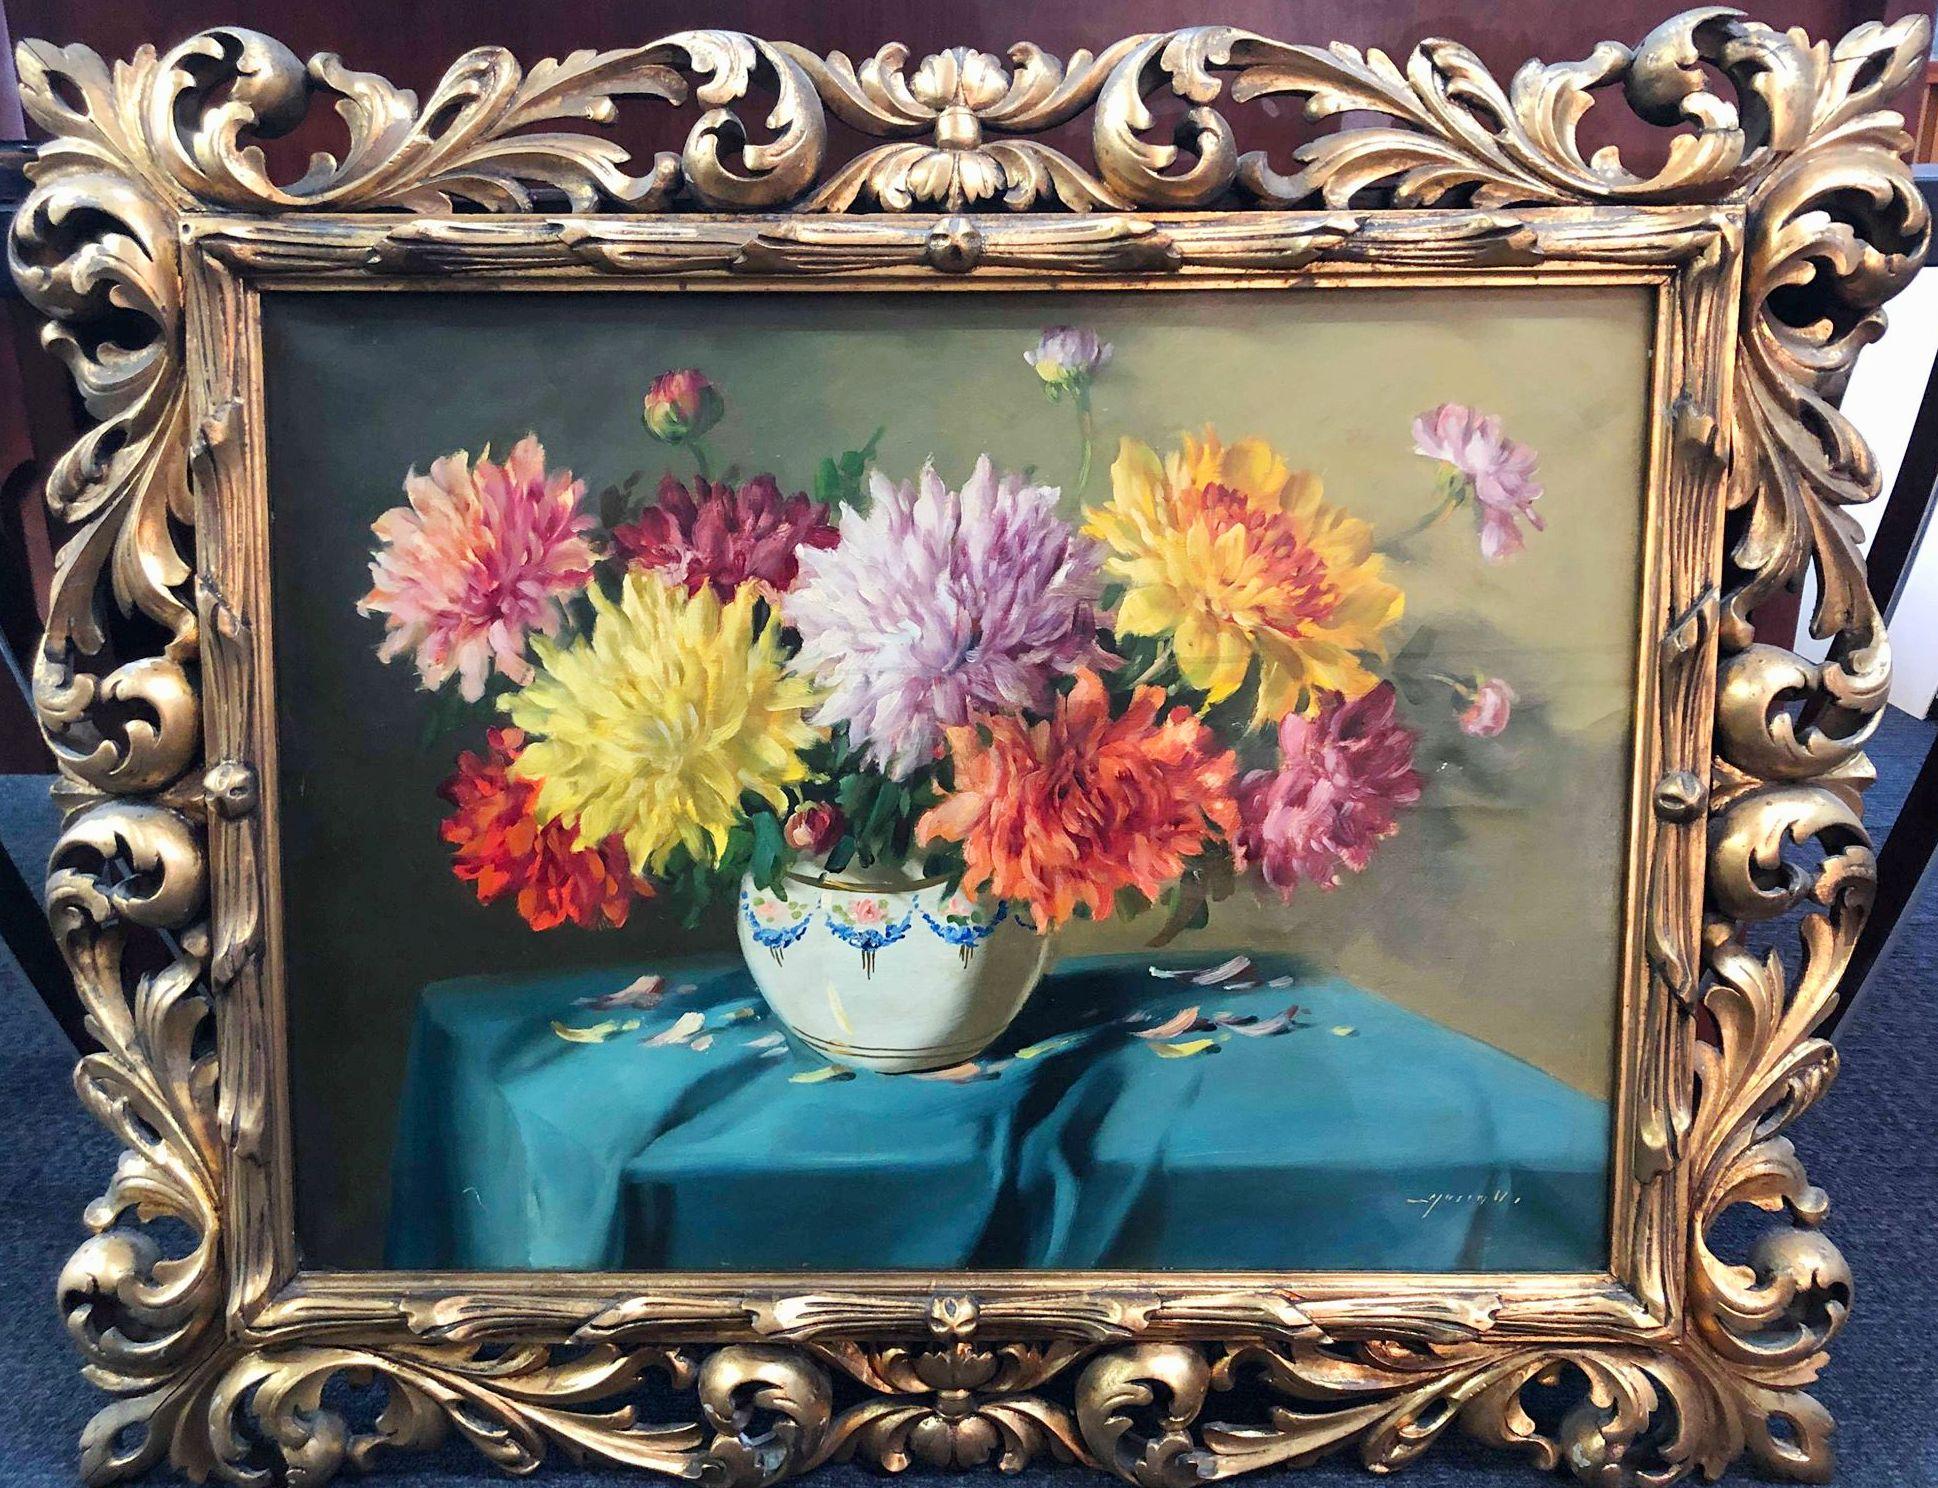 Canvas Still Life with Chrysanthemum Flowers in Florentin Frame by Vilmos Murin, 1930's